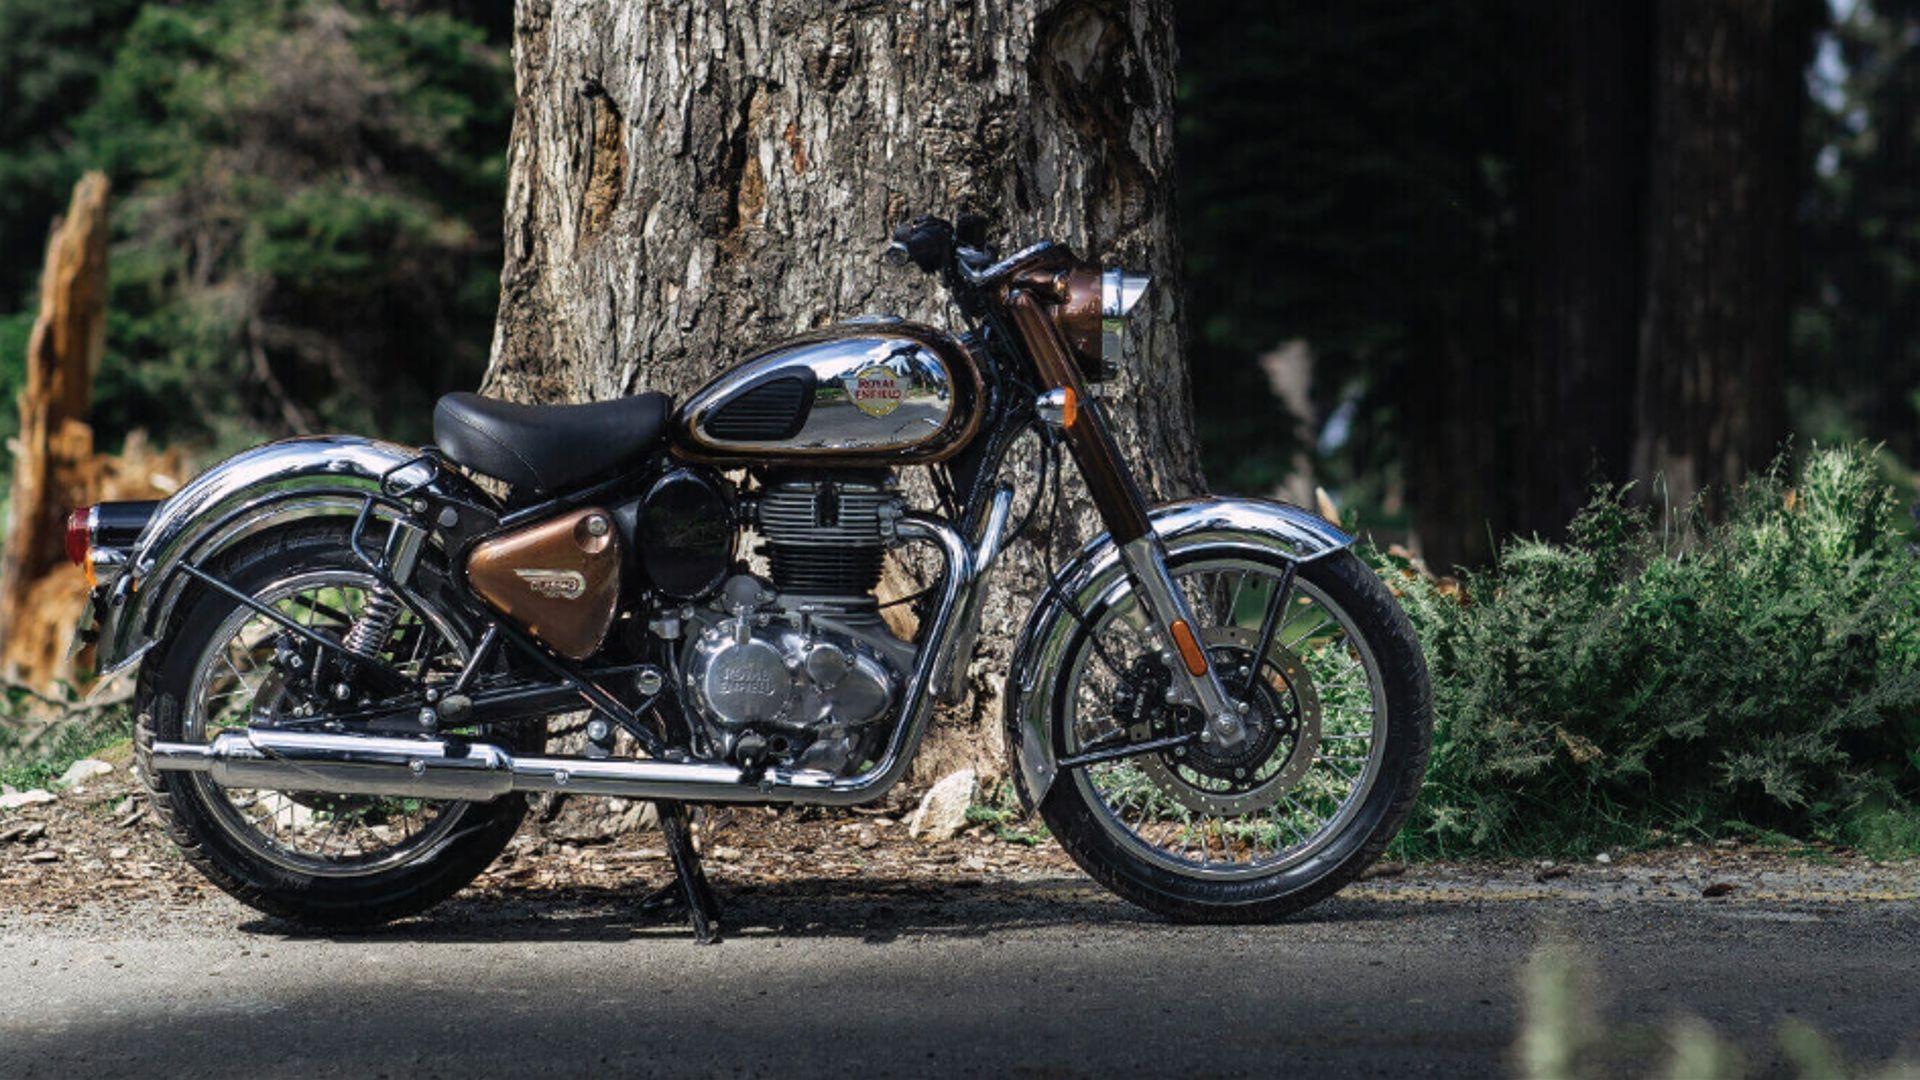 In financial year 2023-24, Royal Enfield sold 9.12 lakh motorcycles, a 9 per cent bump over the sales of 8.34 lakh motorcycles in 2022-23.